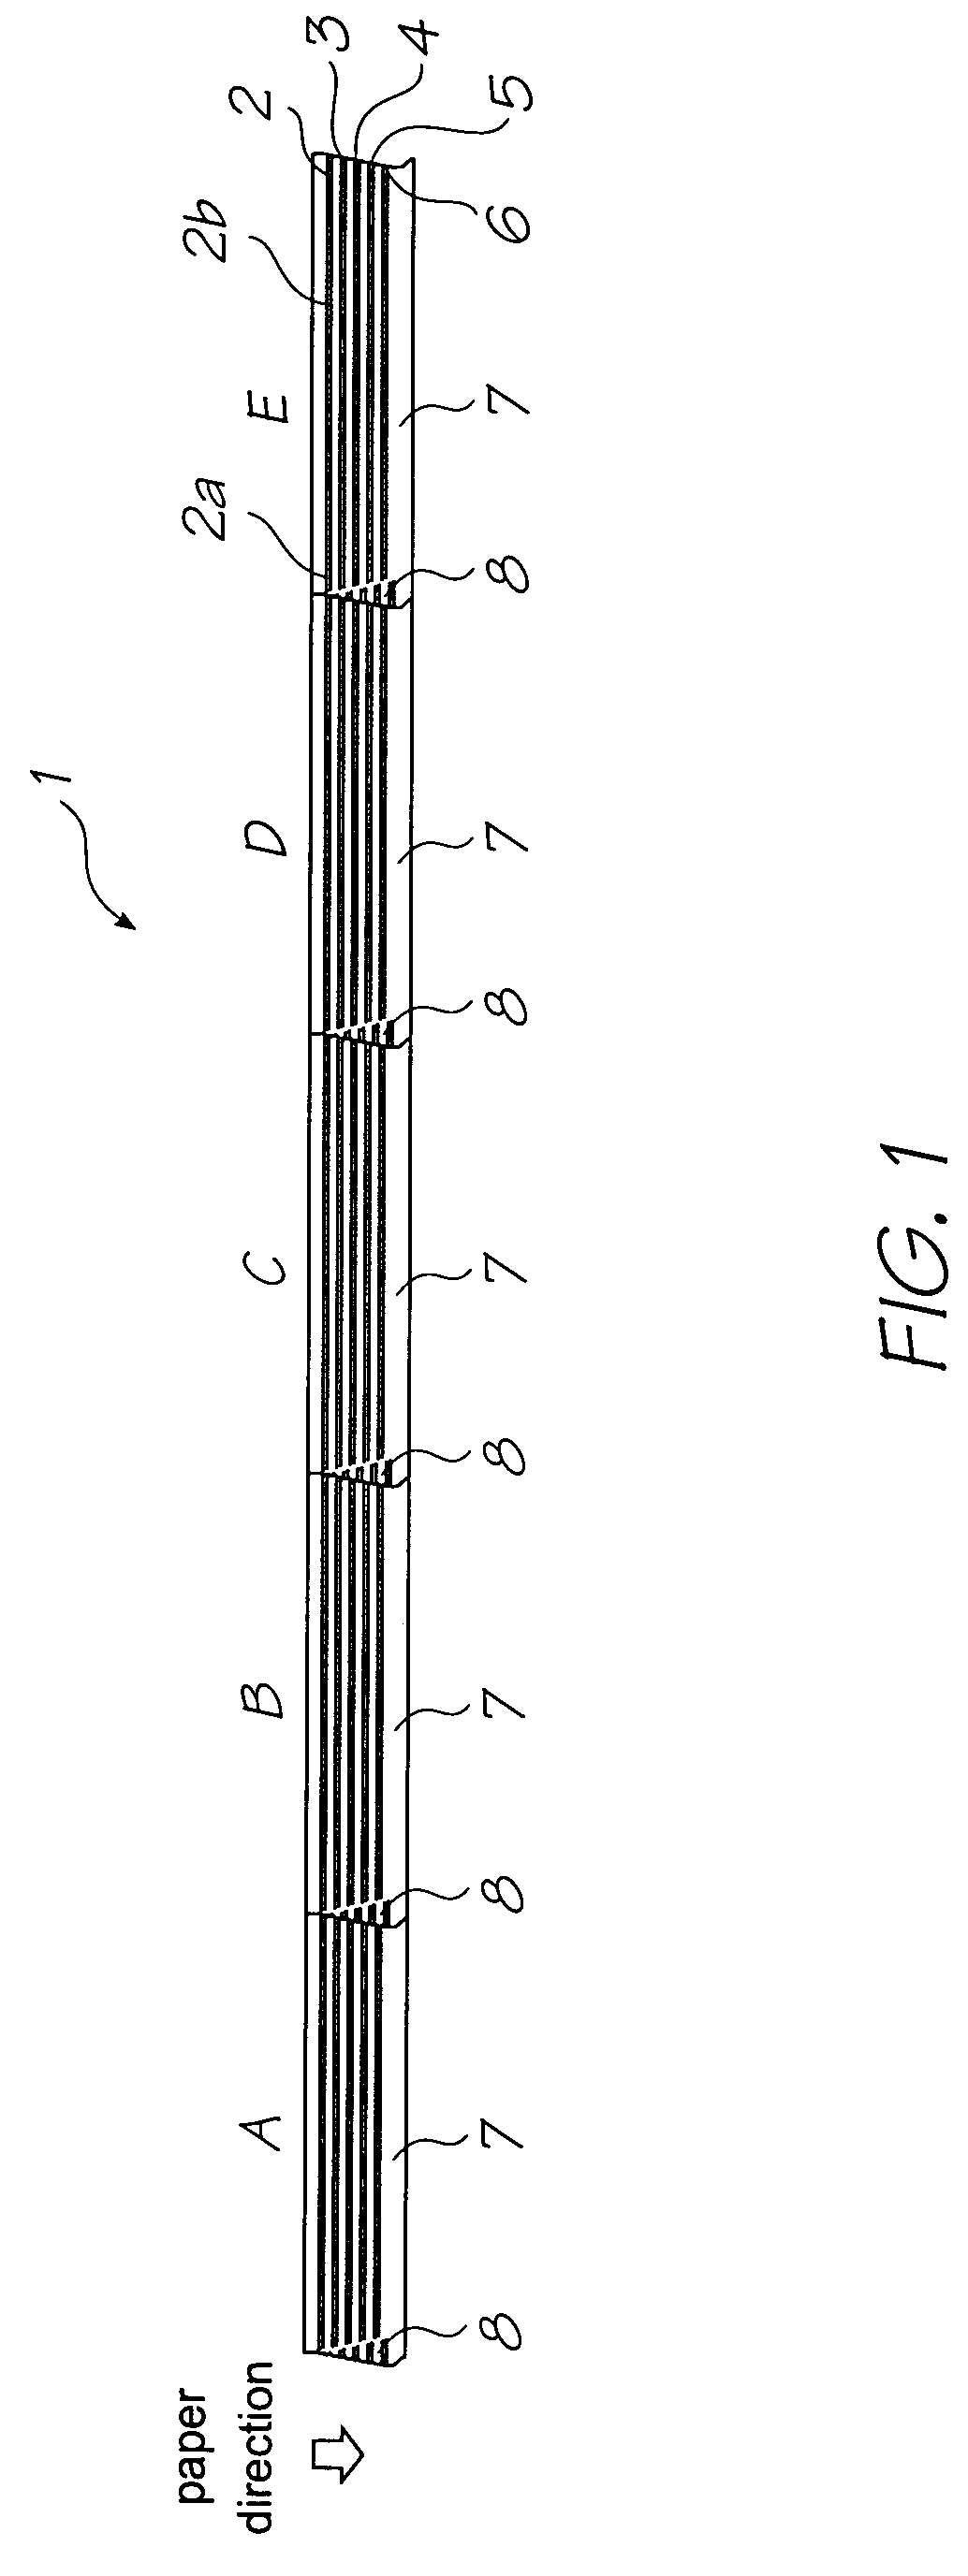 Method of modulating printhead peak power requirement using out-of-phase firing